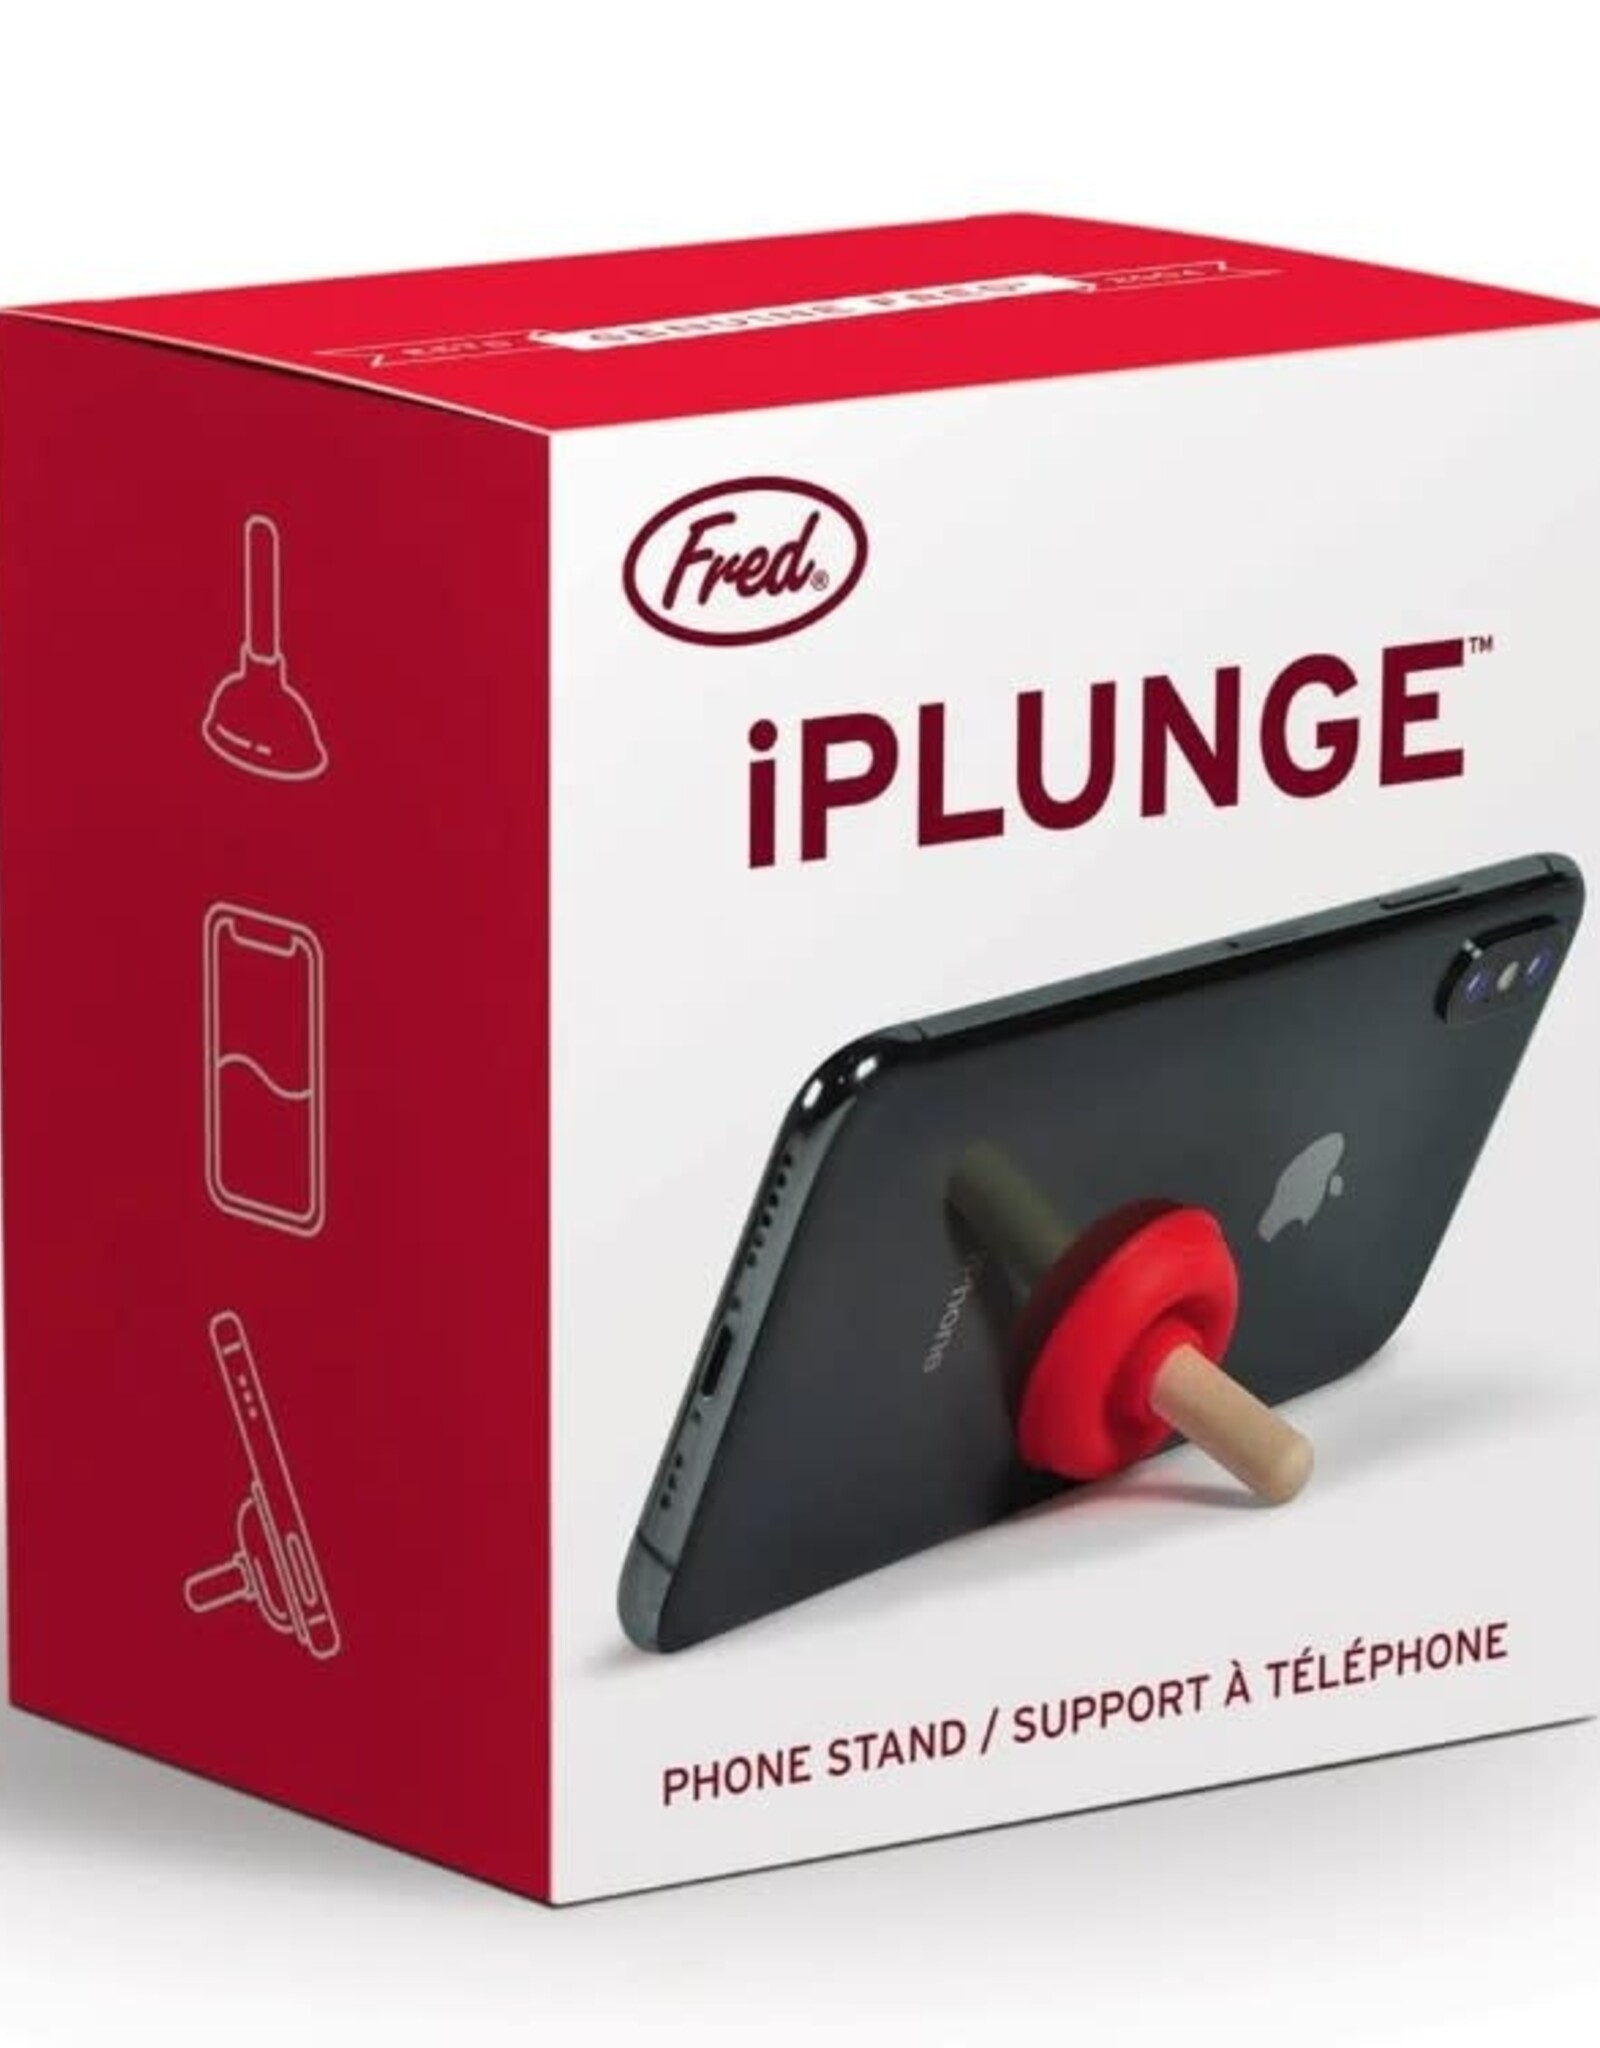 Fred & Friends IPLUNGE - PHONE STAND